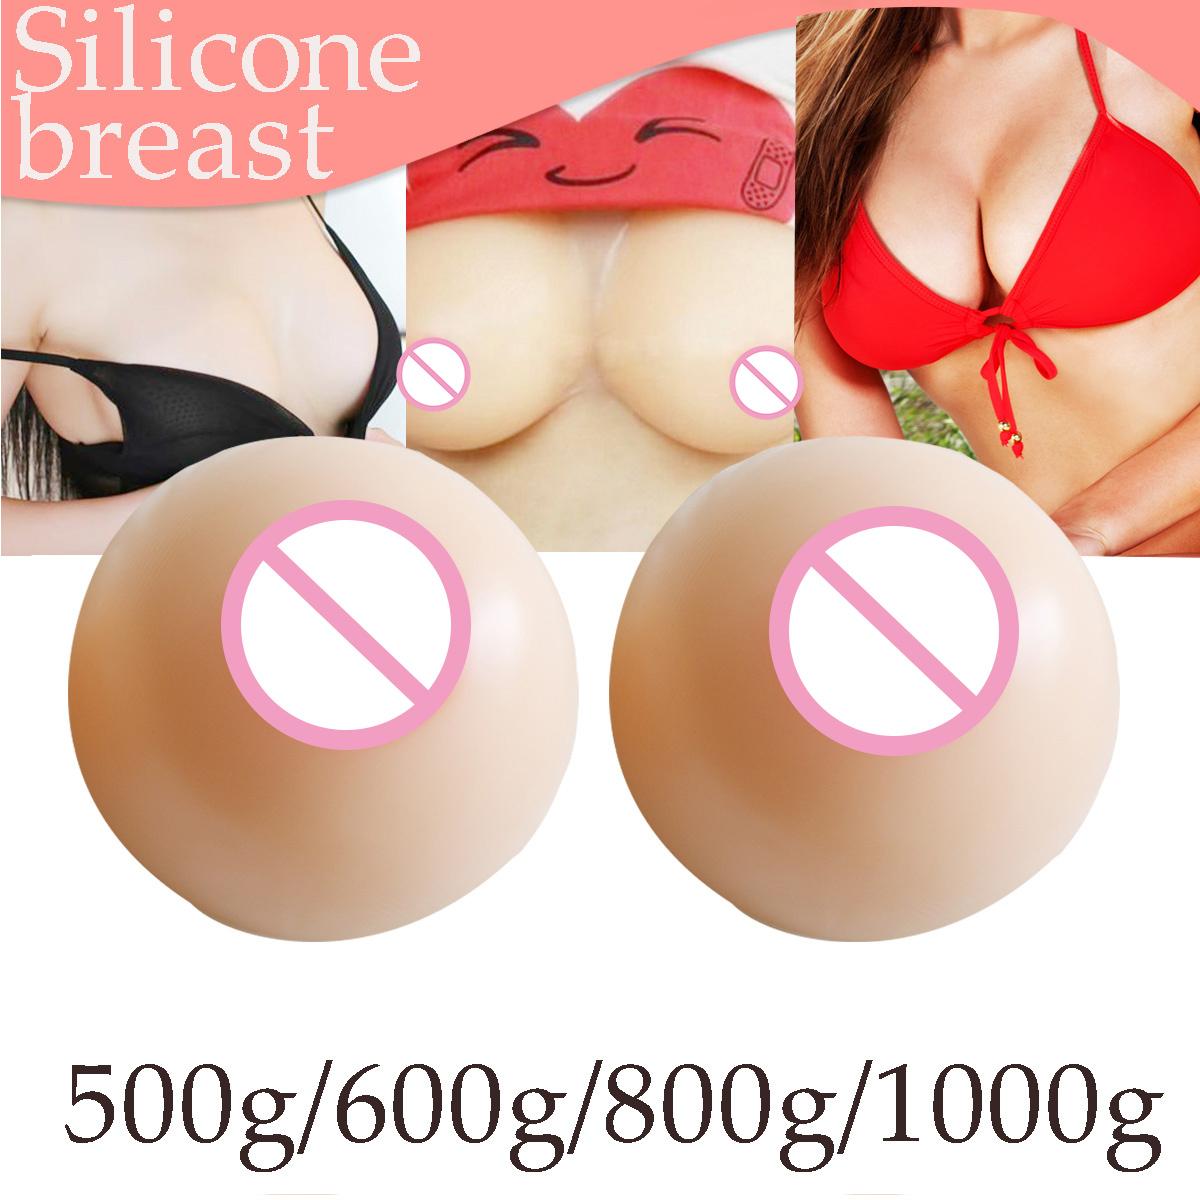 Realistic Shemale Fake Boobs False Breast Forms Crossdresser Boobs Silicone Adhesive Breast Tits For Drag Queen Crossdresser